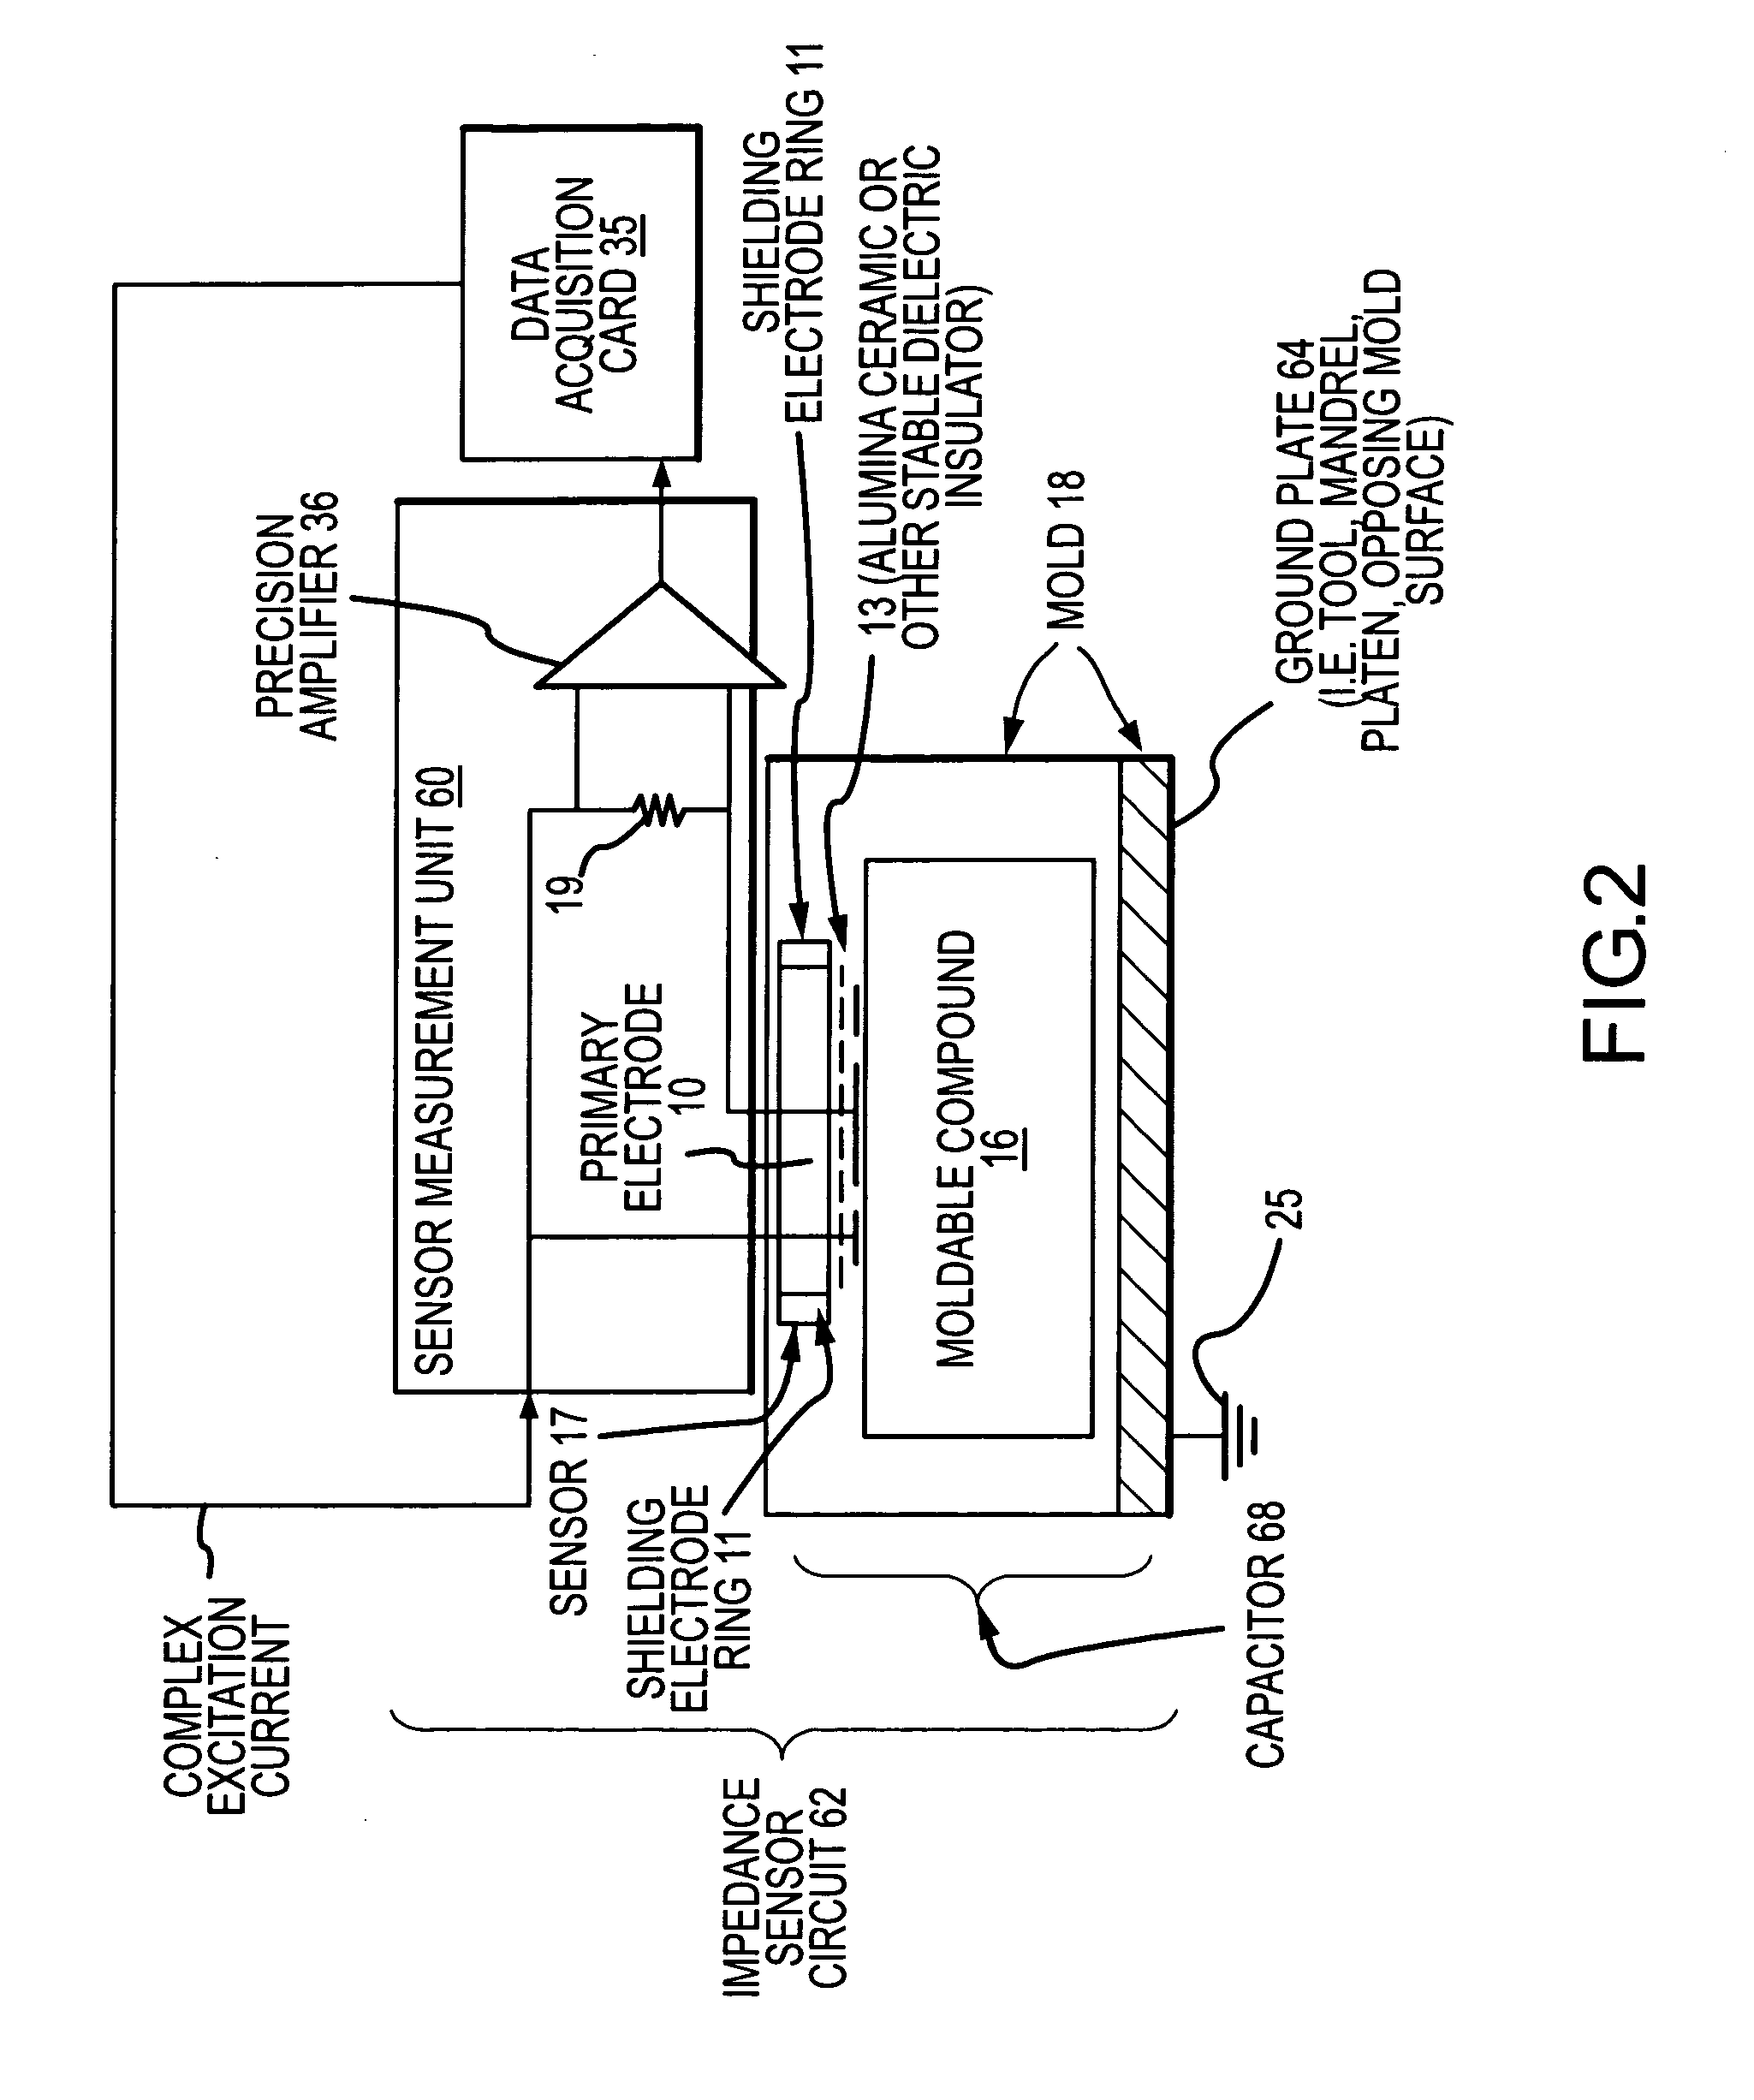 Process and apparatus for improving and controlling the curing of natural and synthetic moldable compounds